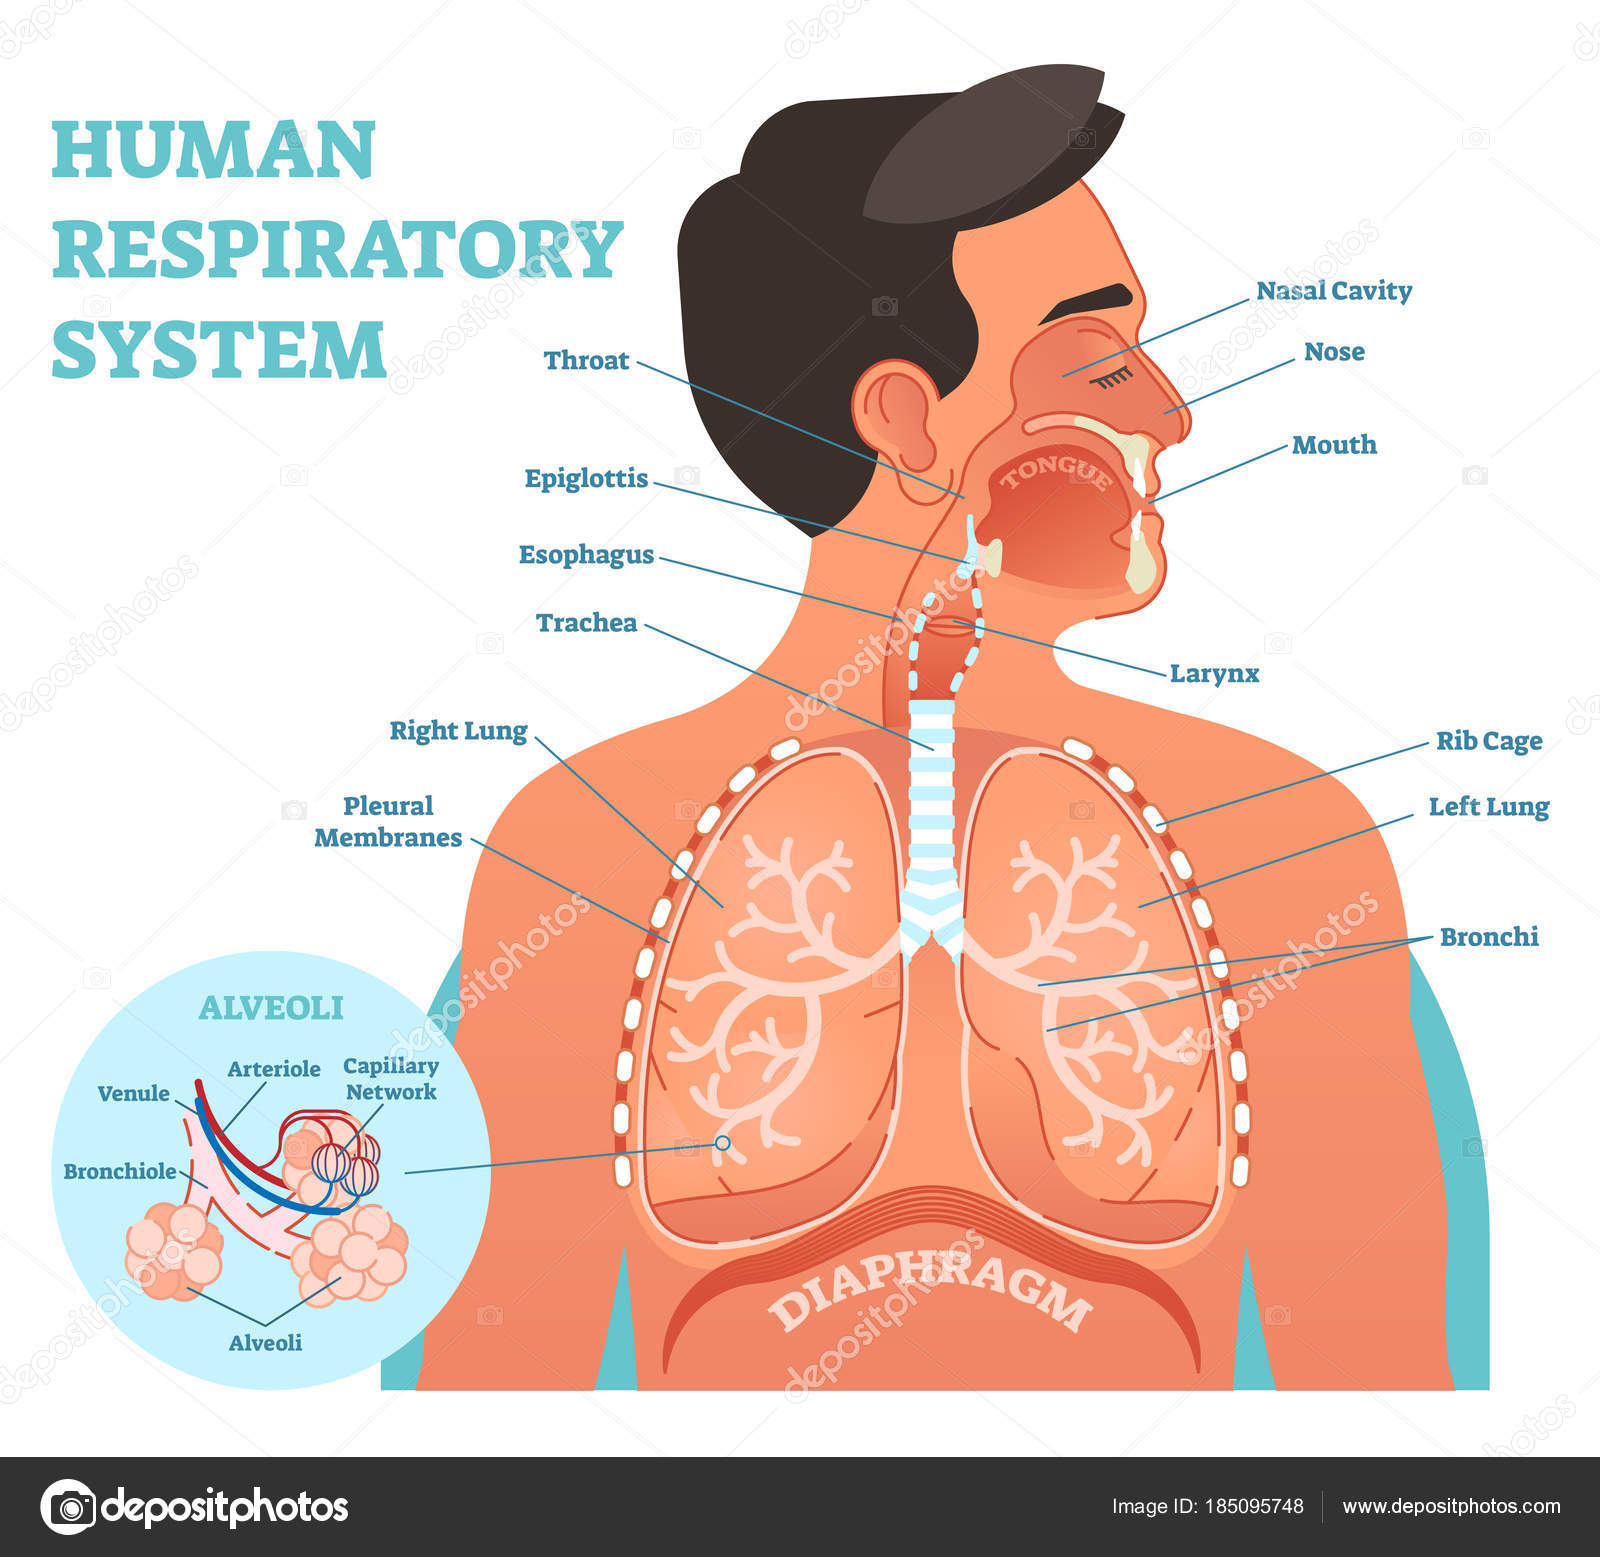 The Respiratory System Diagram Human Respiratory System Anatomical Vector Illustration Medical